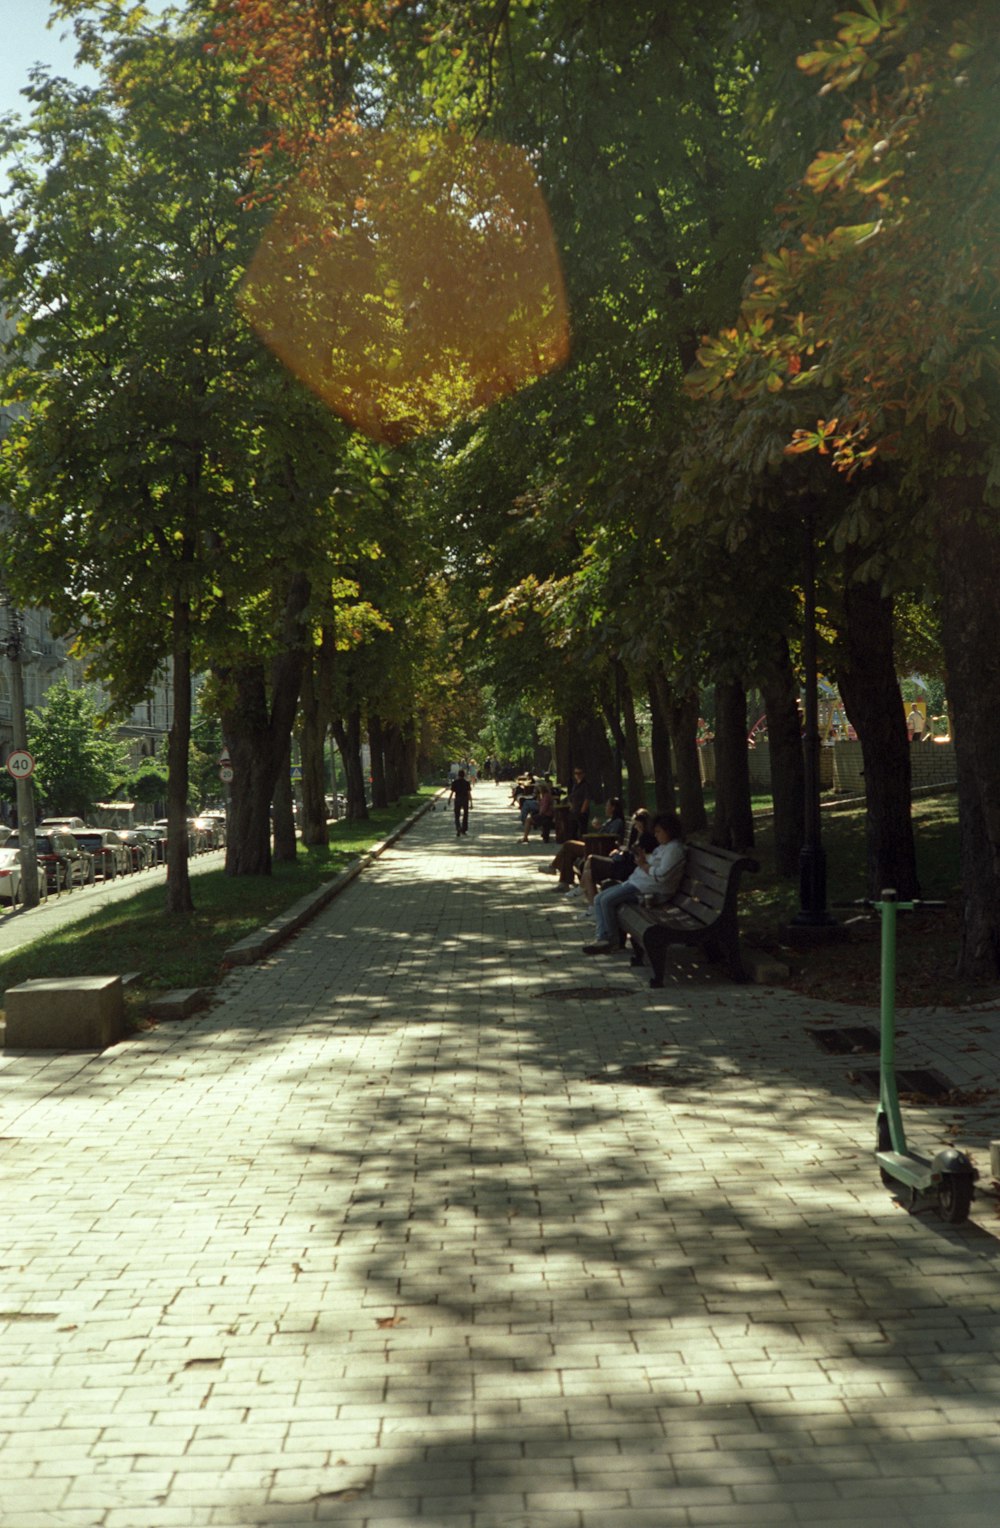 a group of people sitting on a bench under trees